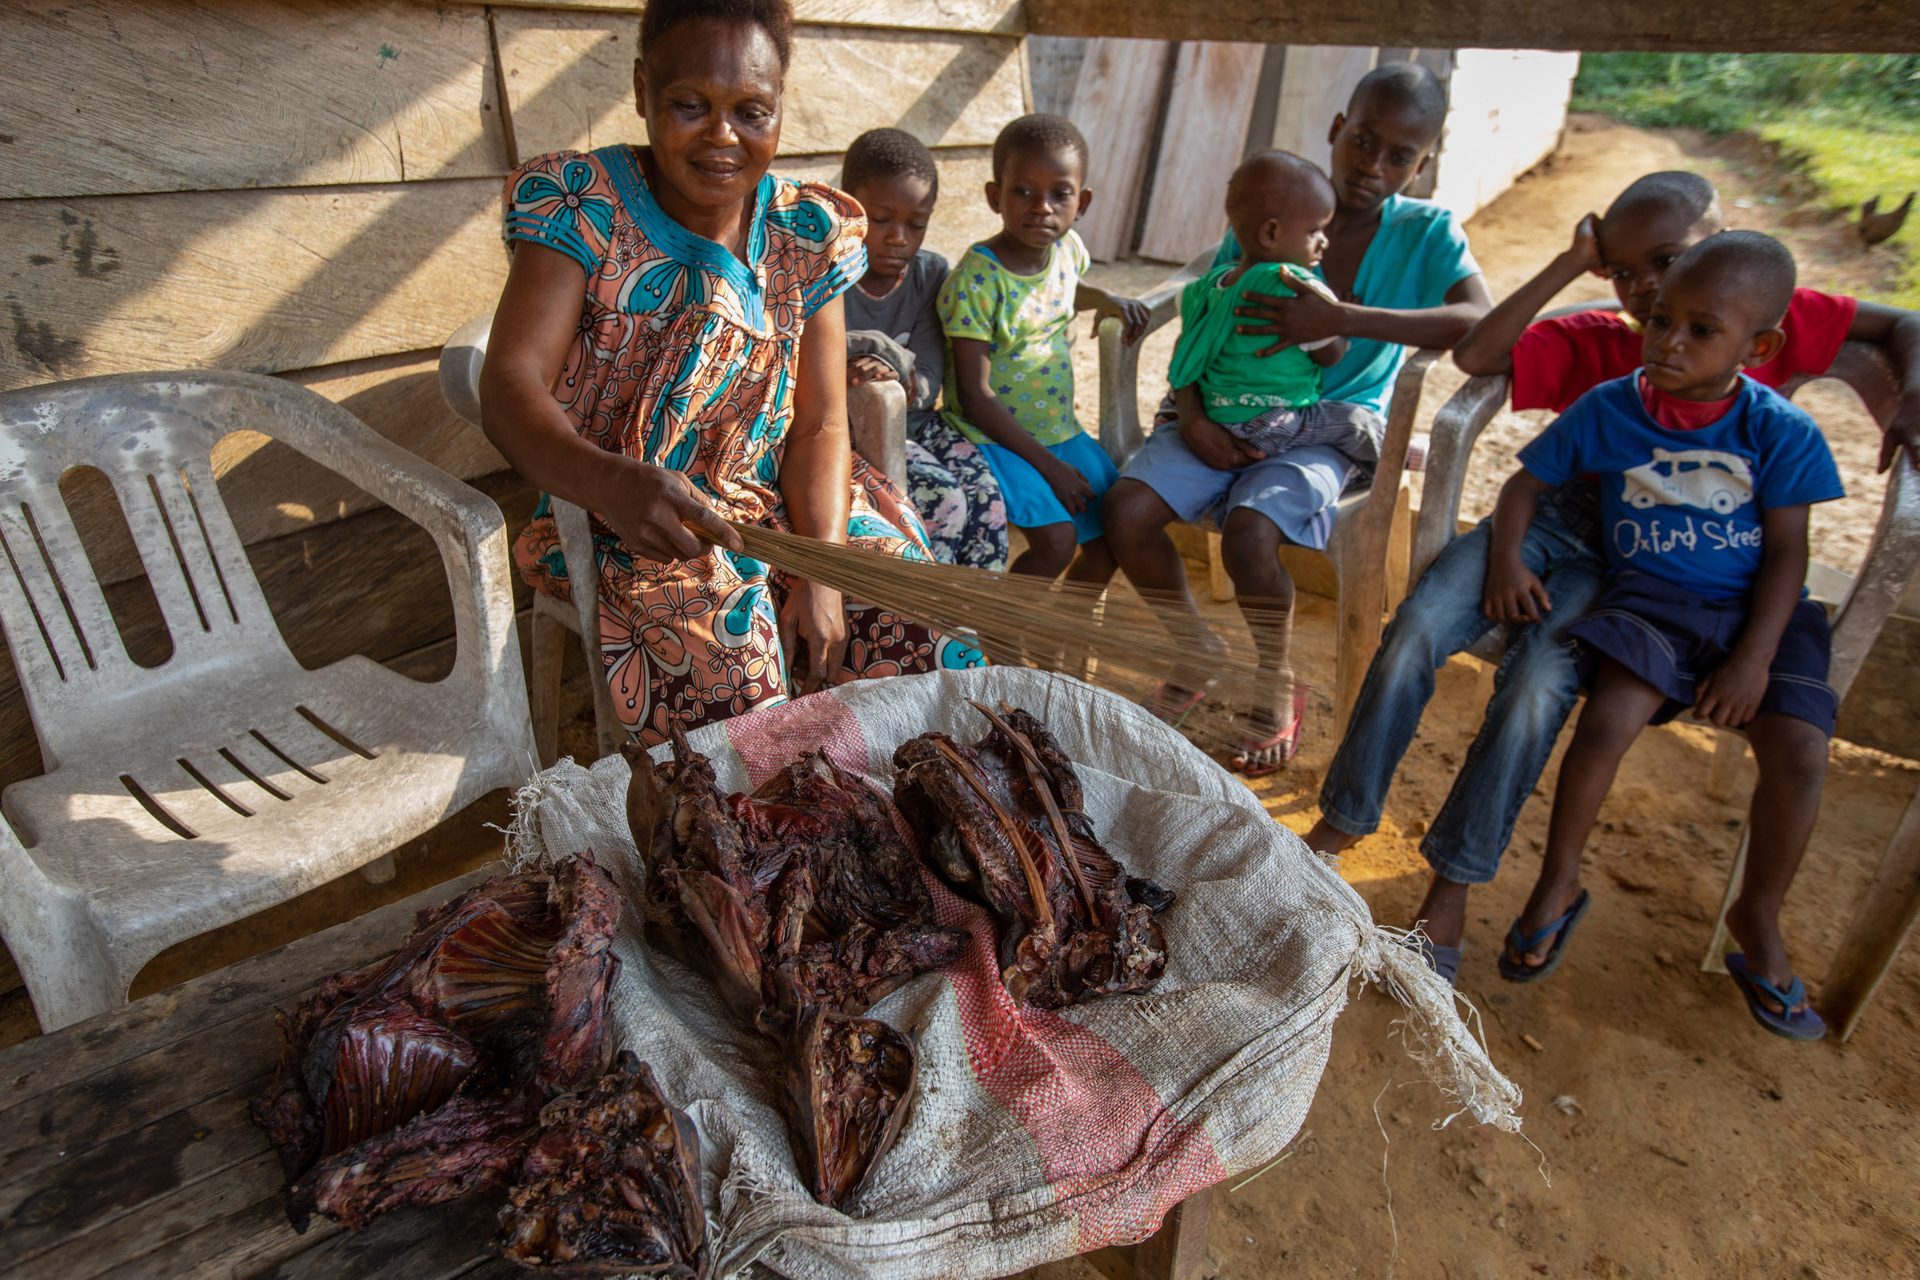 If cooked and eaten without following strict precautions, wildlife bushmeat can transmit dangerous diseases to humans. 